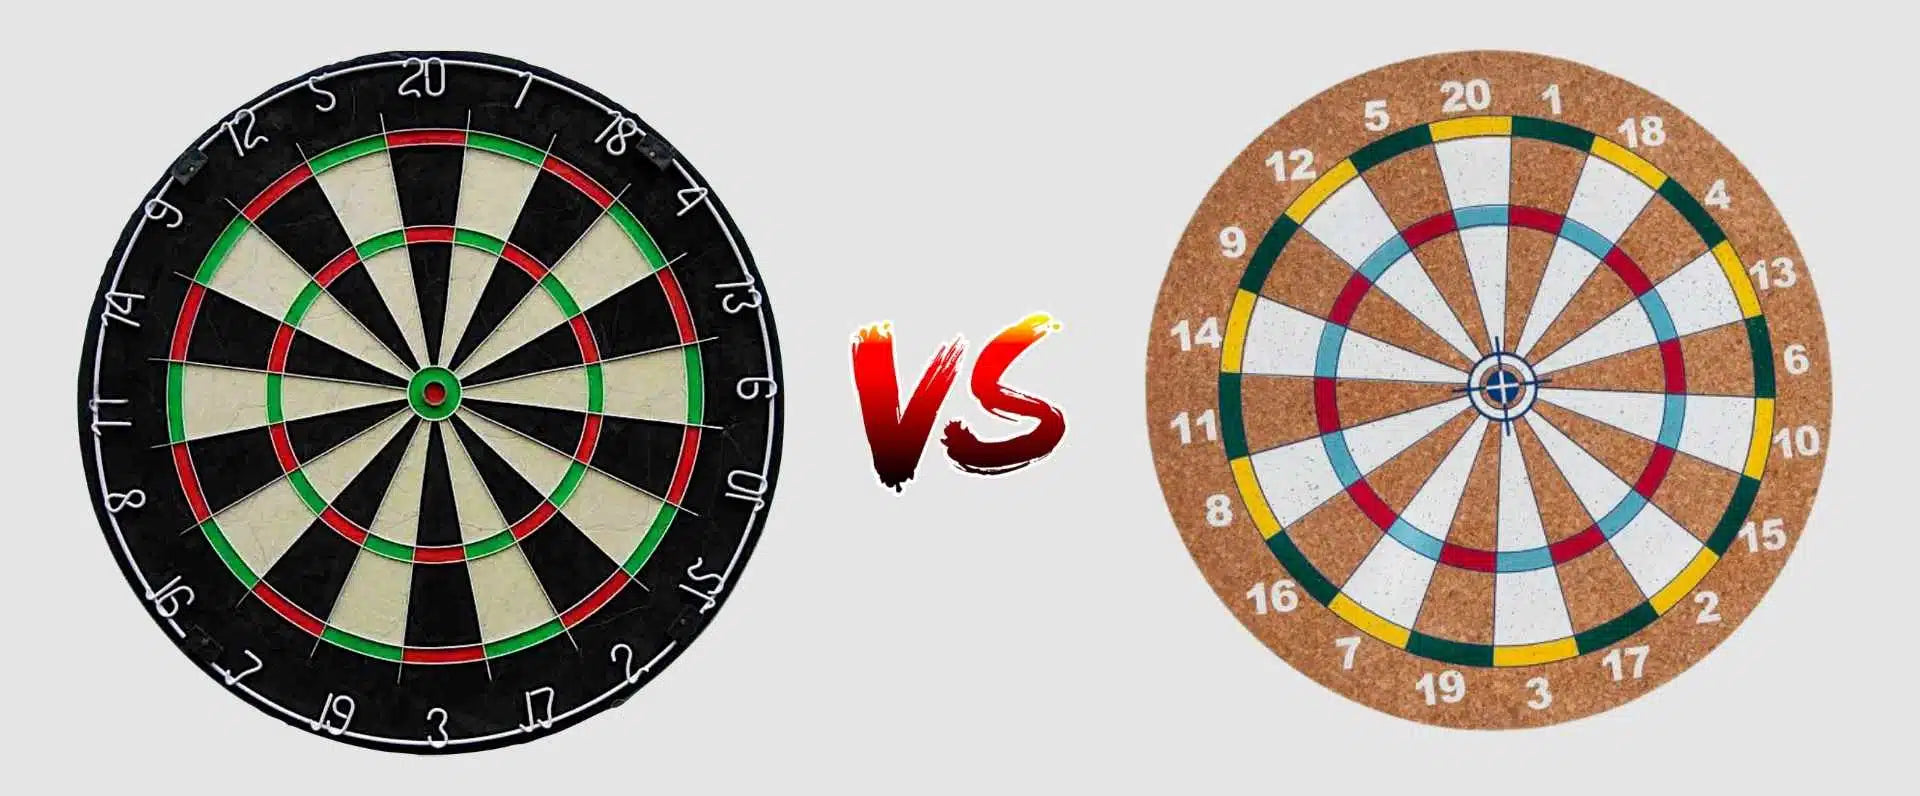 Dartboard made of cork or sisal: the advantages and disadvantages 🎯